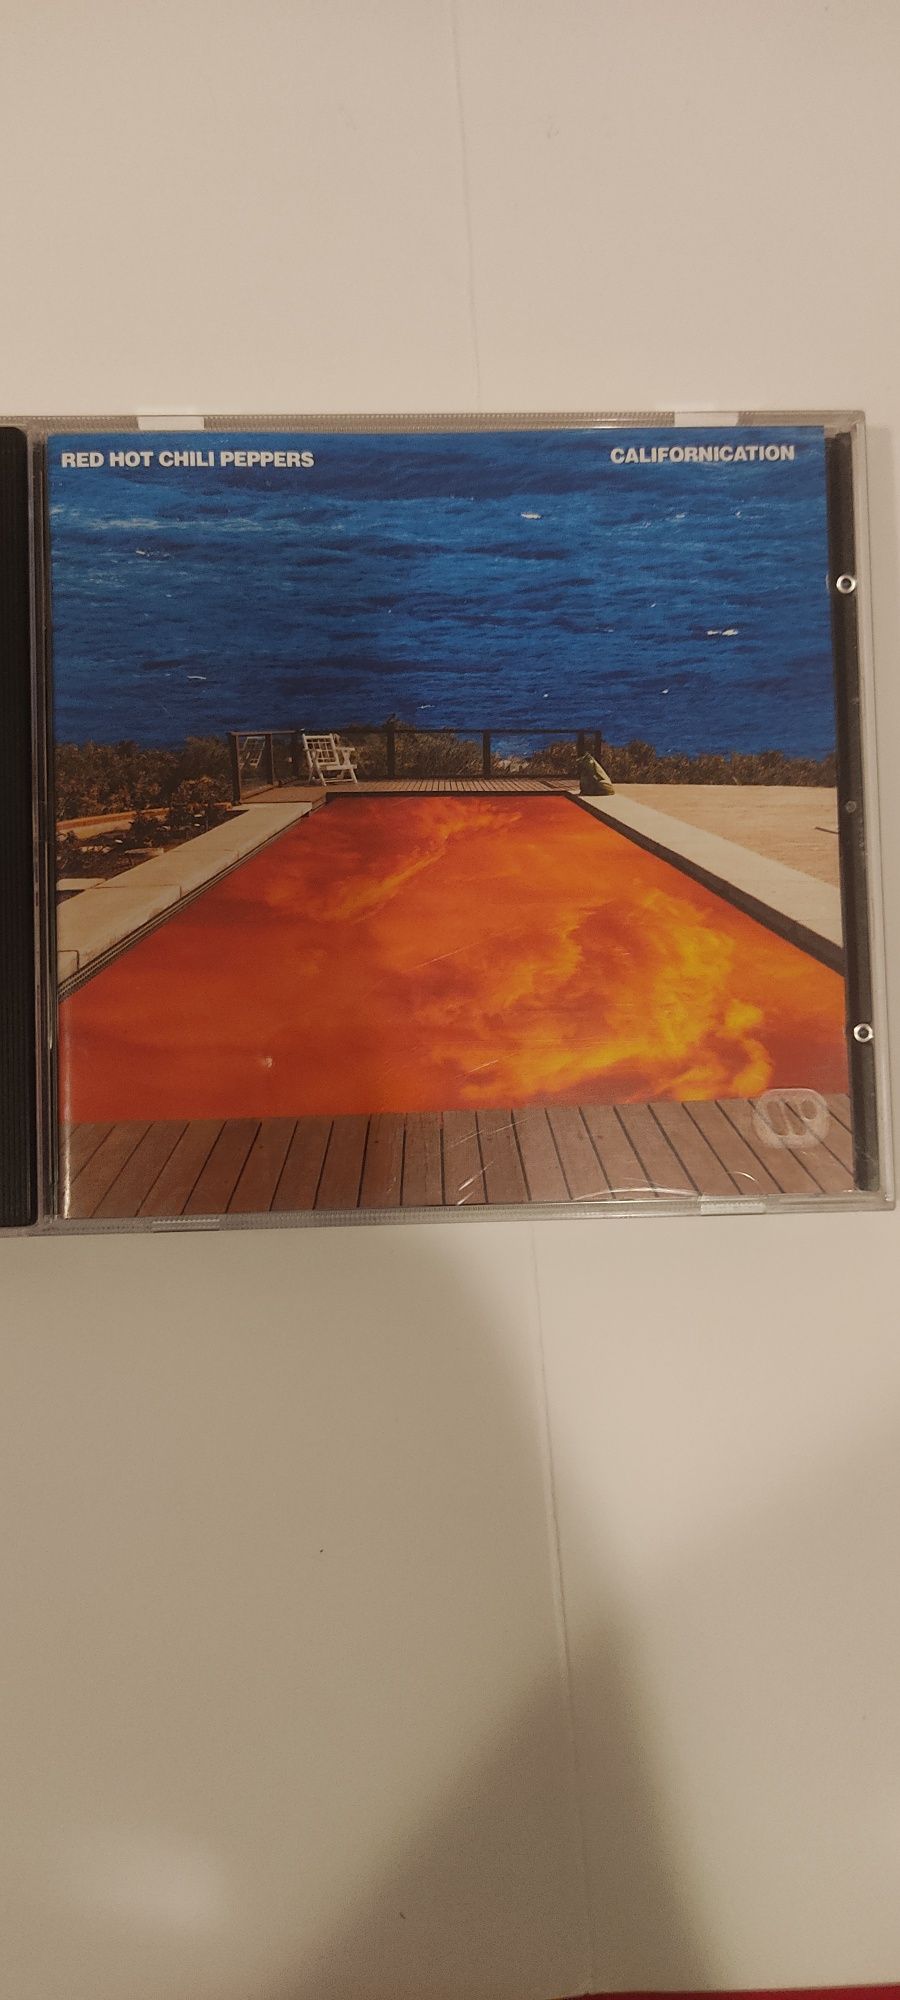 CD Red hot chili peppers Californication 1999